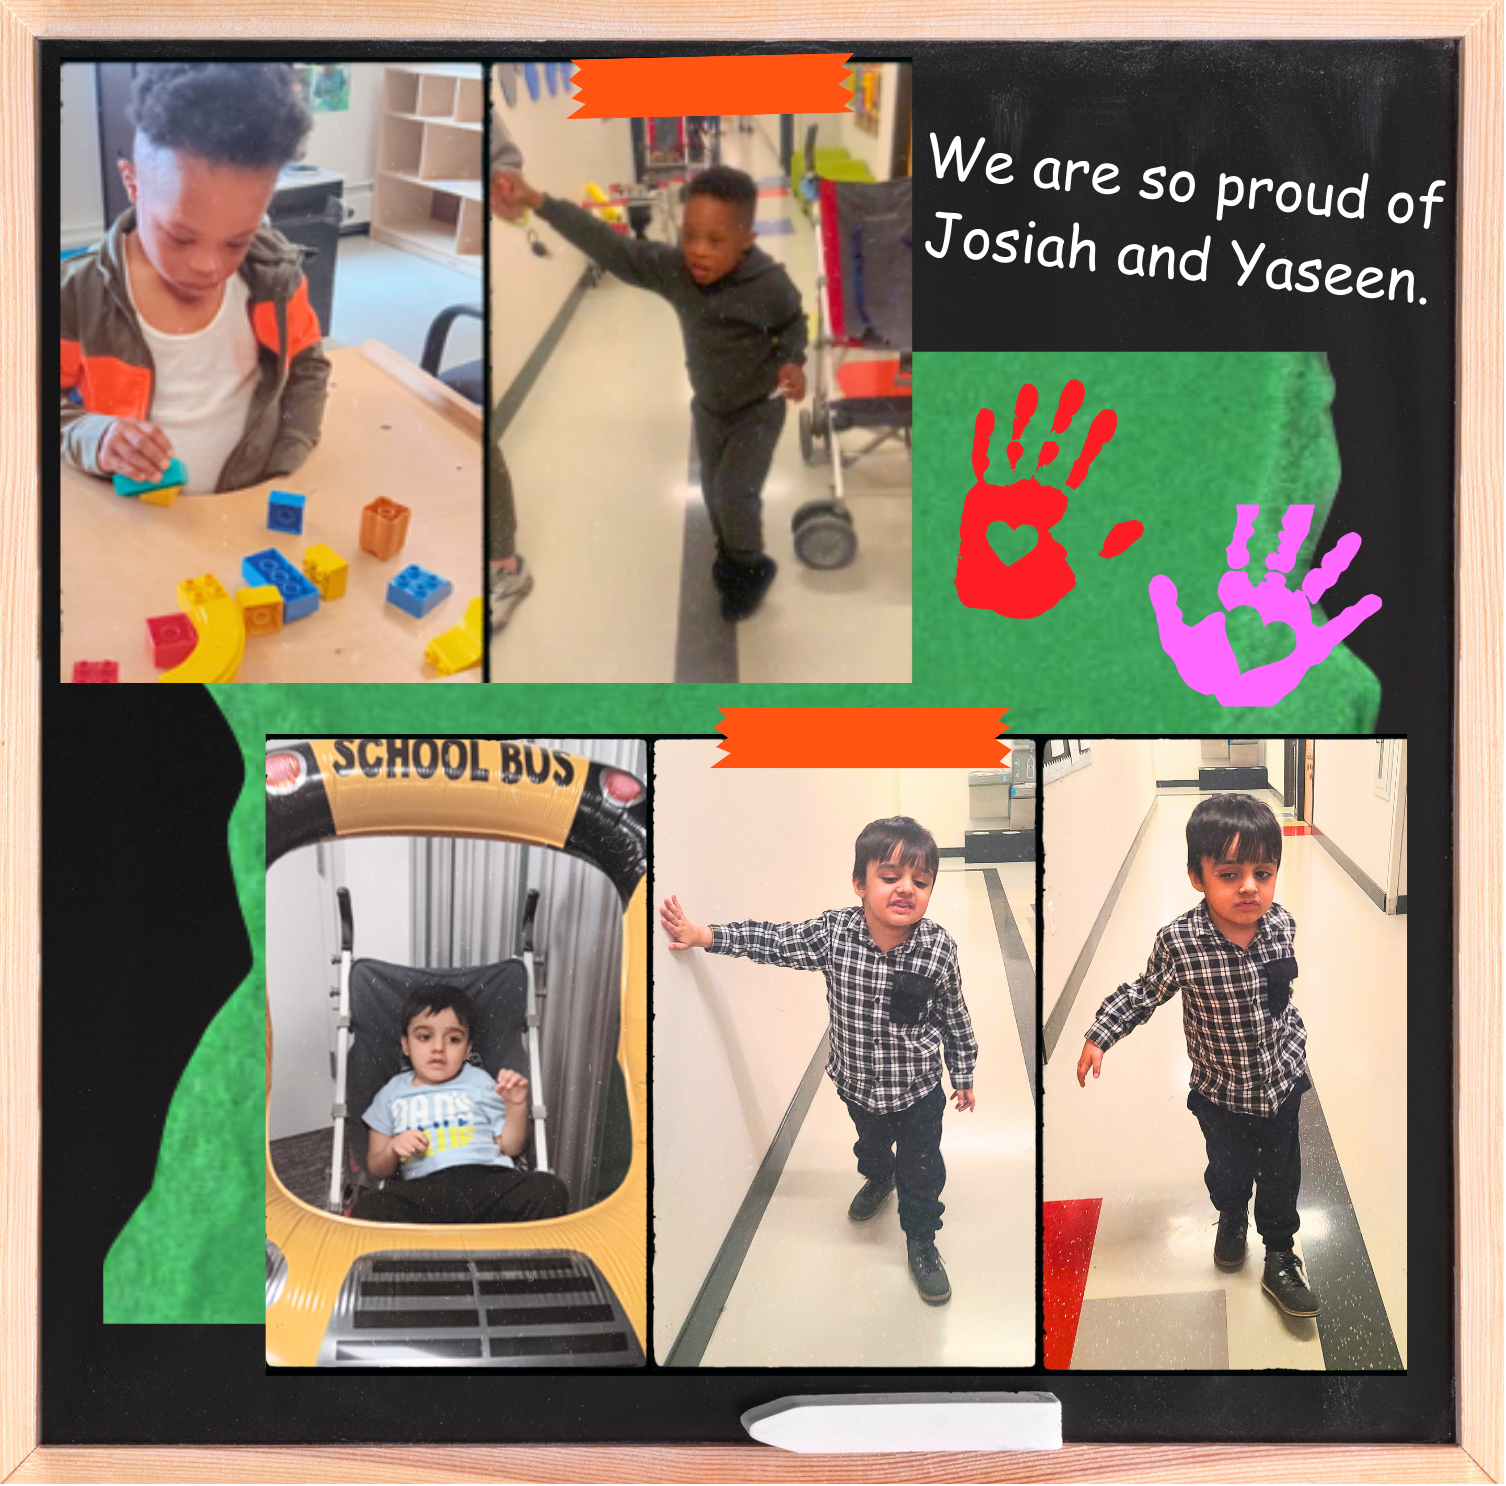 A collage of two young boys playing with blocks, sitting, and standing in a hallway. Texts on the graphic says "We are so proud of Josiah and Yaseen."